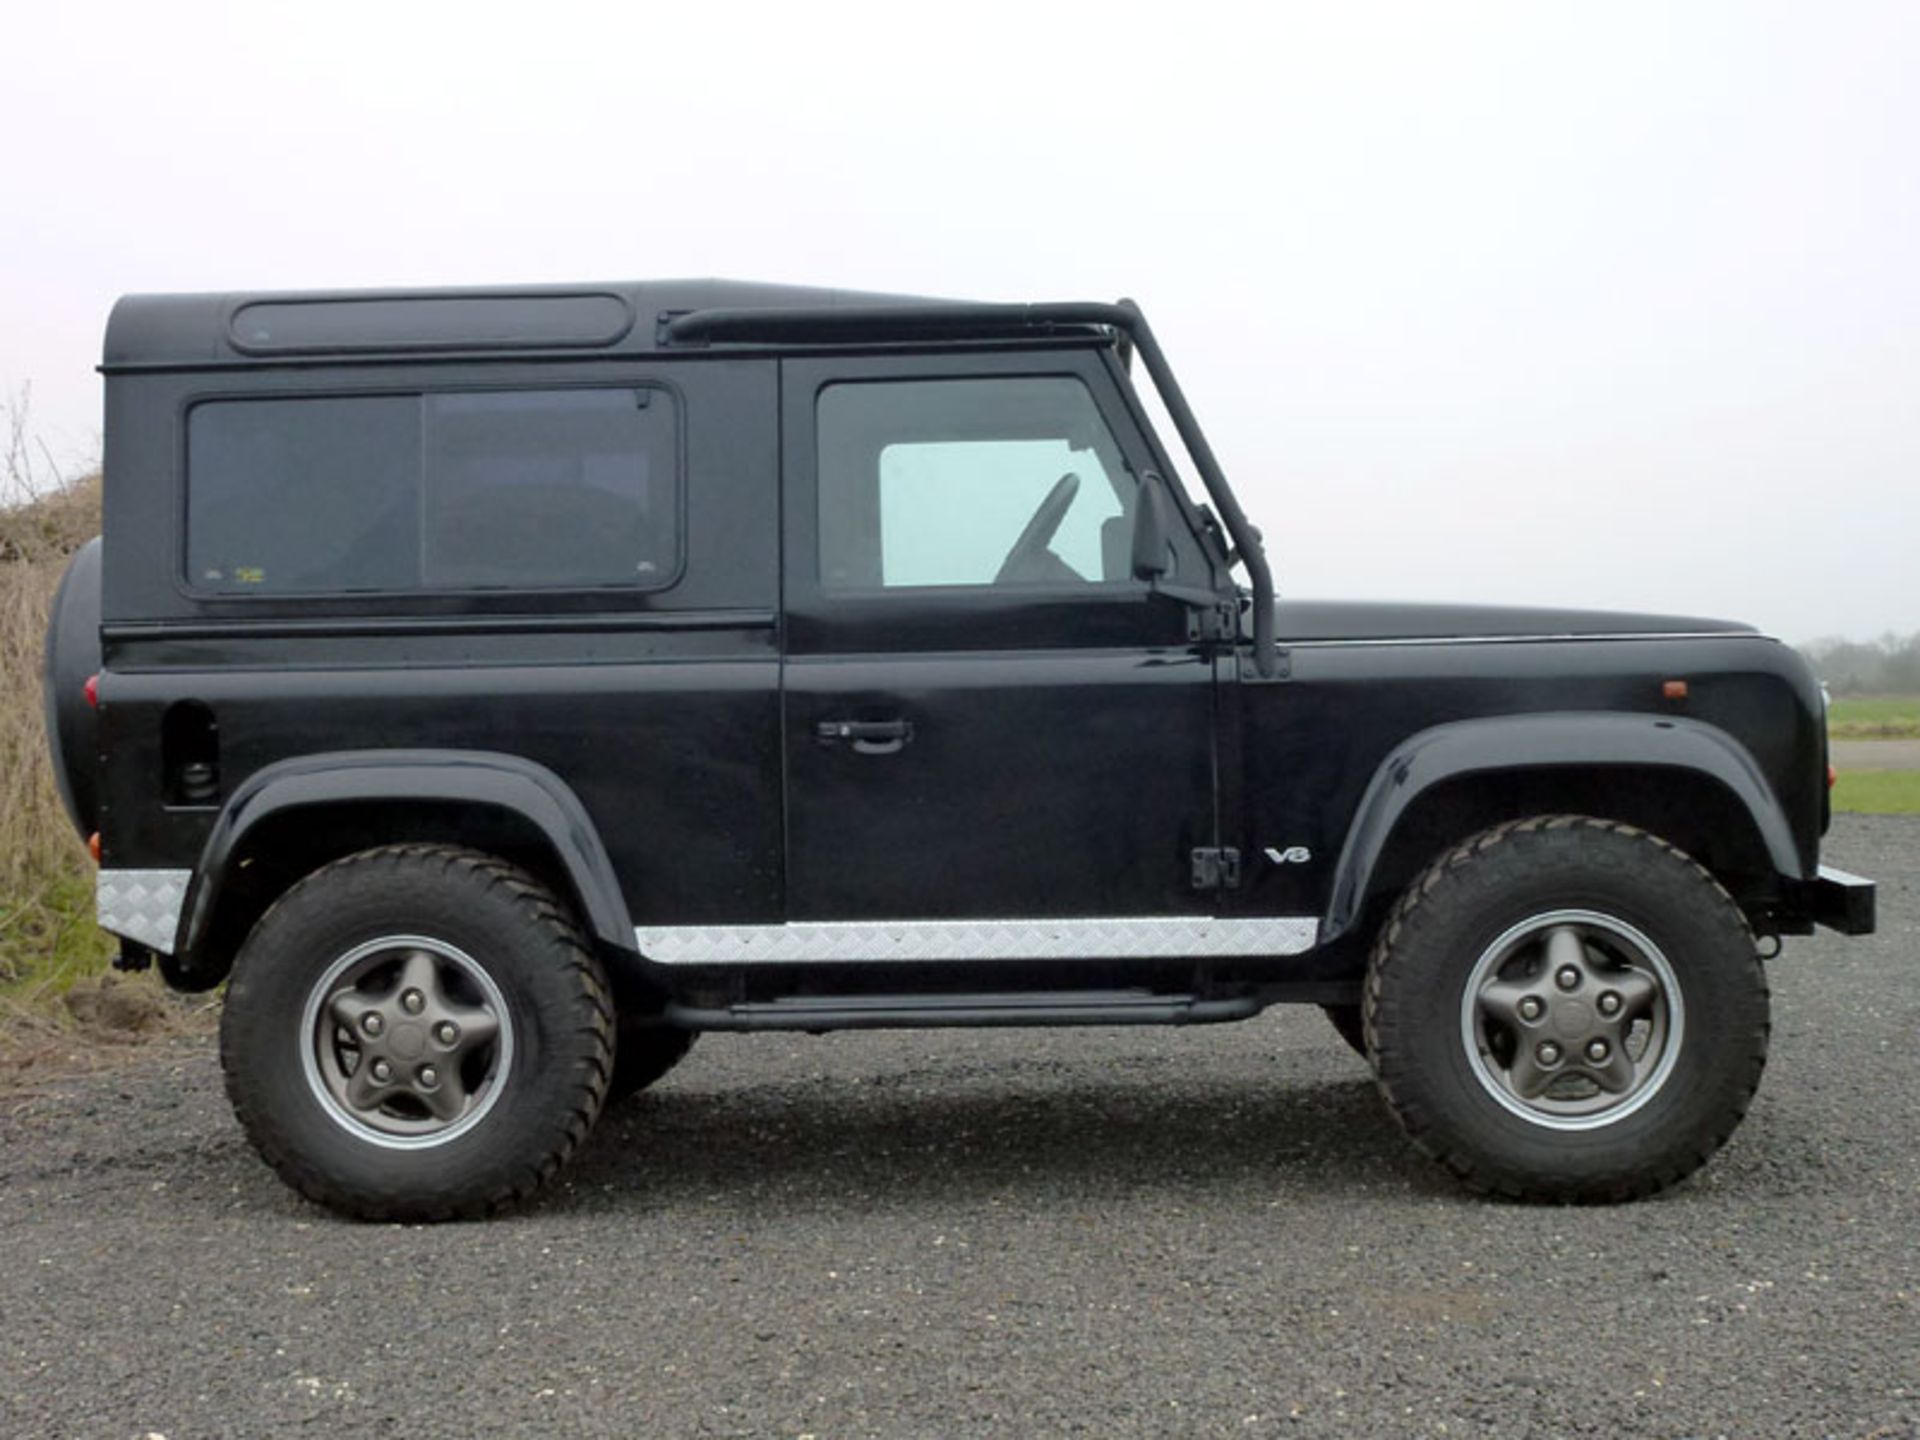 1998 Land Rover Defender 90 50th Anniversary - Image 2 of 9